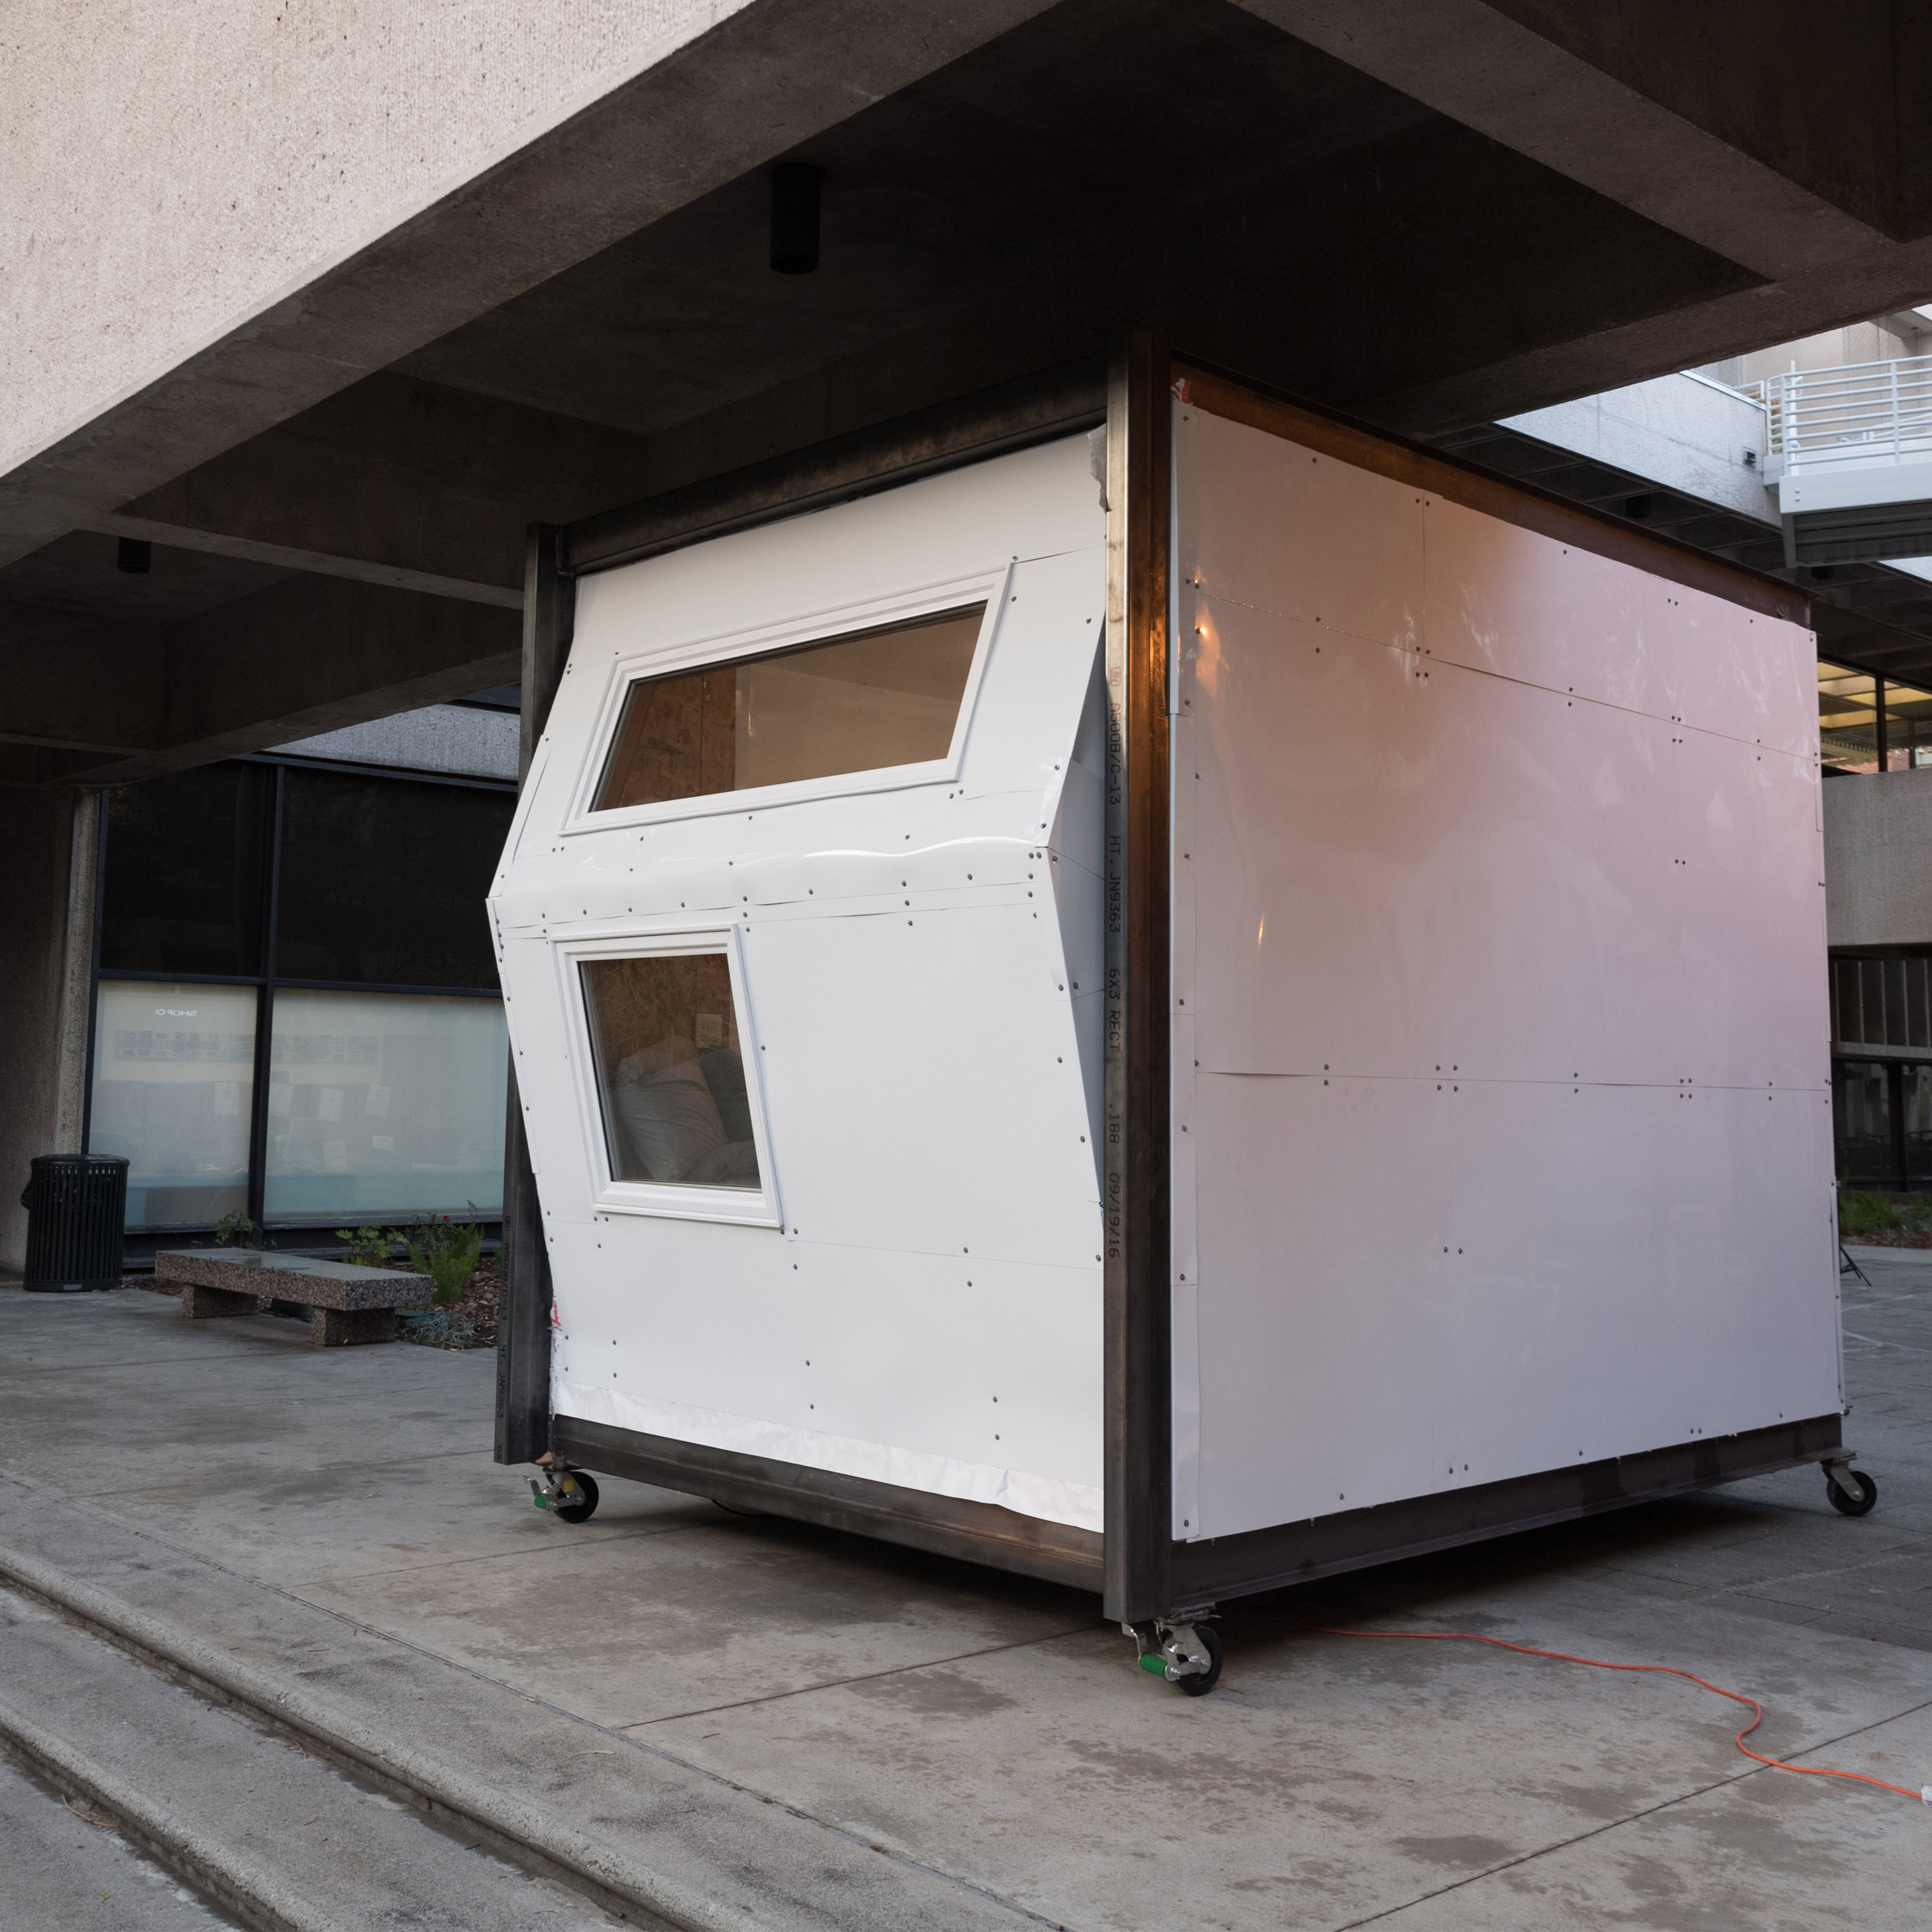 Hope of the Valley 1 - rear - Project Homeless Studio by MADWorkshop and USC